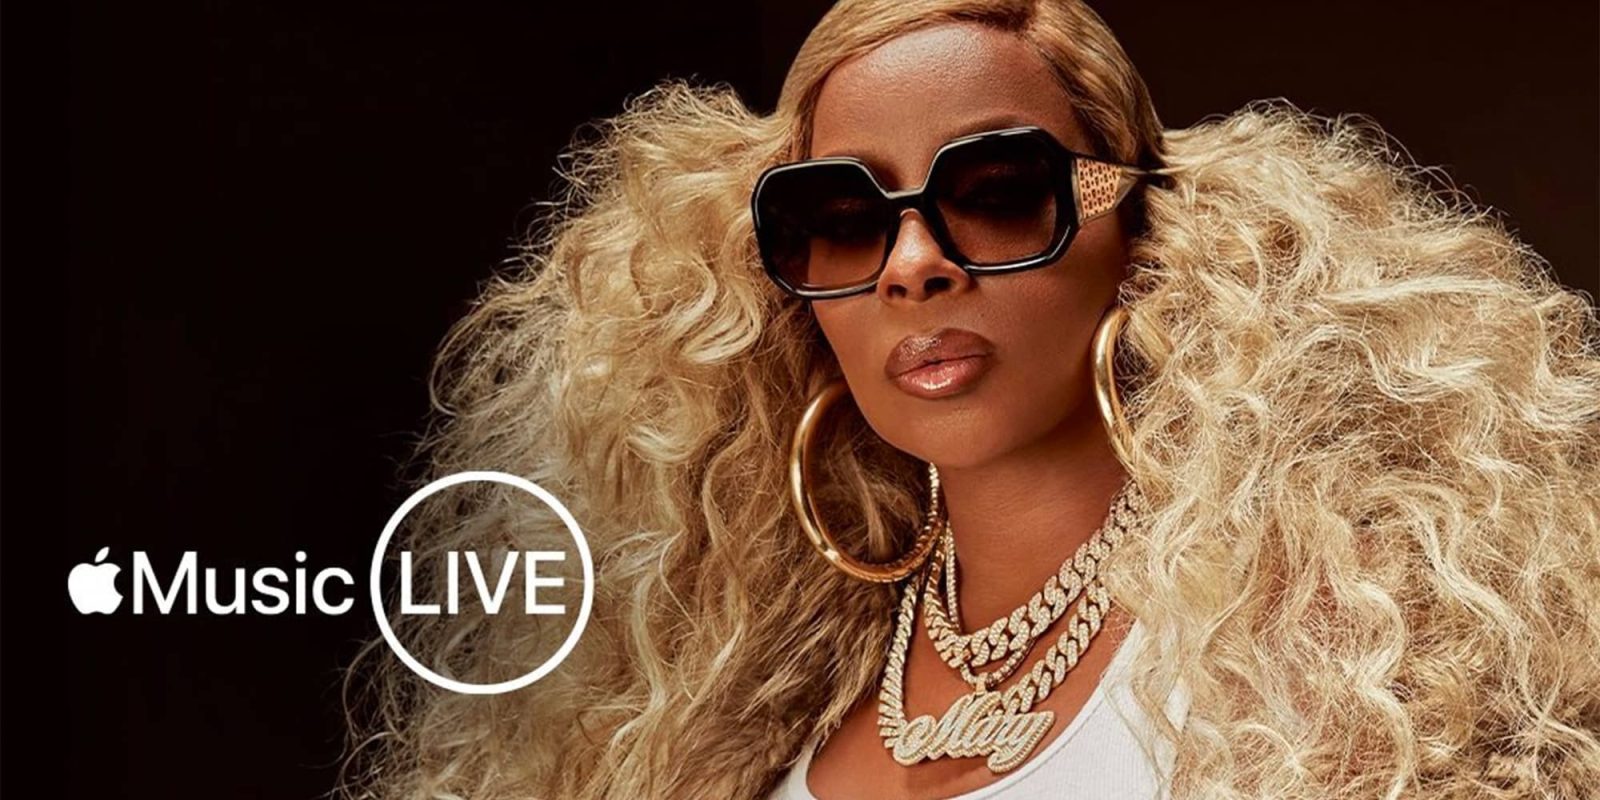 Mary J Blige Concert | Live Stream, Date, Location and Tickets info